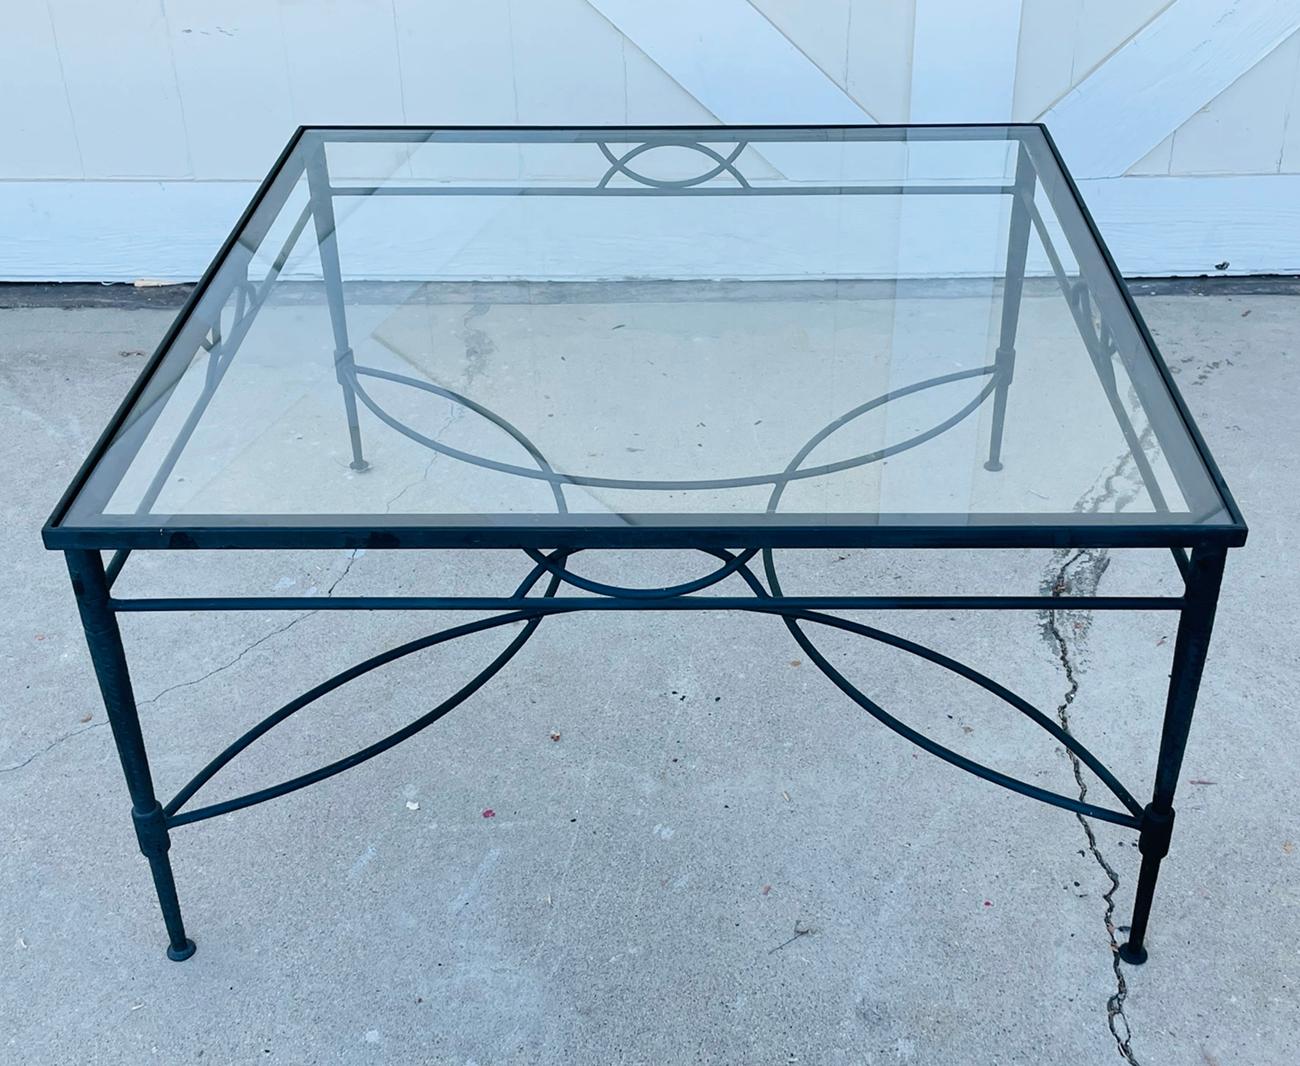 Beautiful coffee table by Janus et Cie and part of the Amalfi collection.

The table is made in solid steel with a slate finish and a glass top.

Measurements:
36 inches wide x 36 deep x 19 inches high.